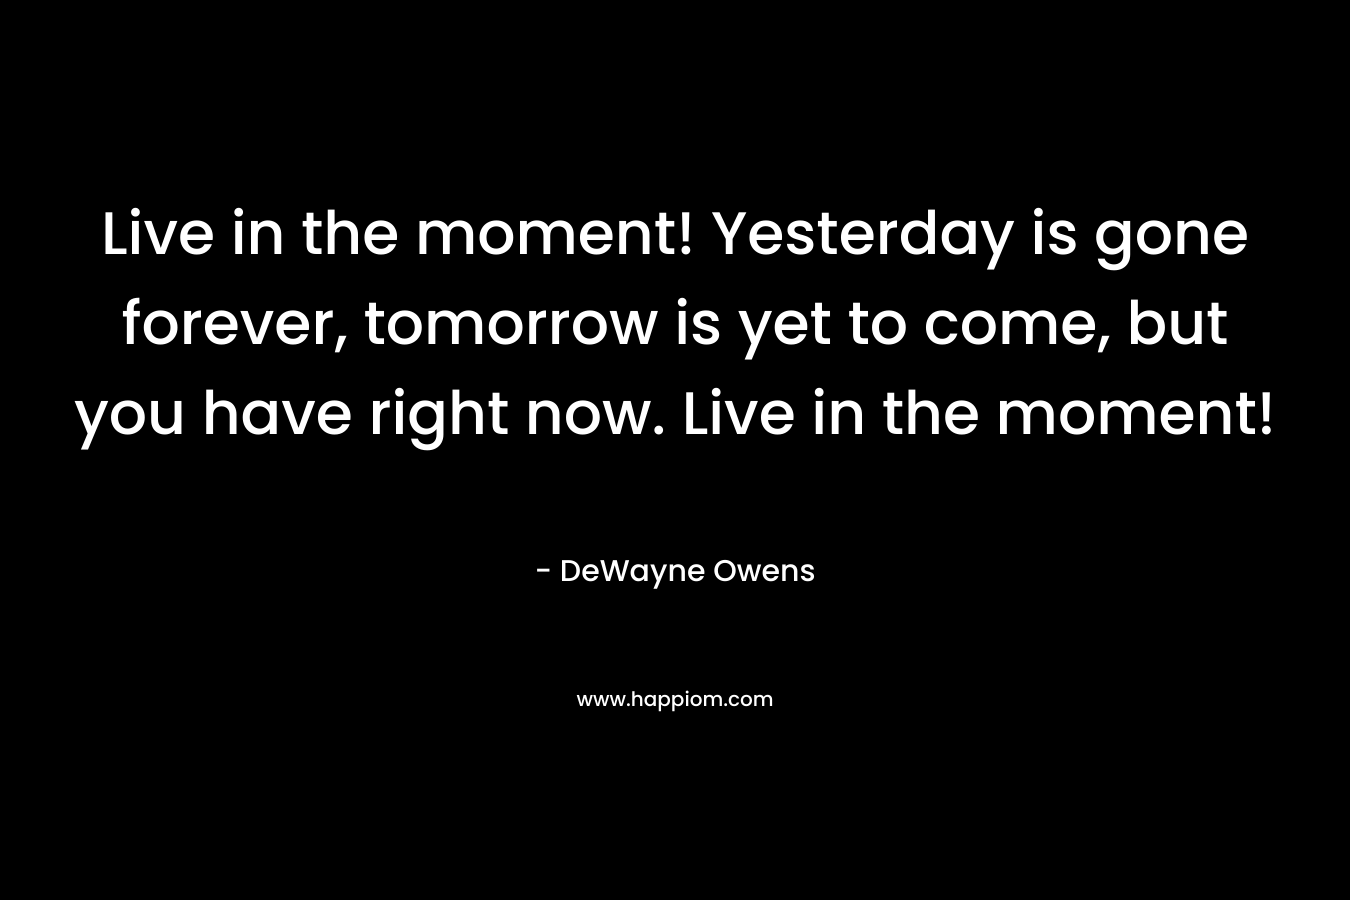 Live in the moment! Yesterday is gone forever, tomorrow is yet to come, but you have right now. Live in the moment! – DeWayne Owens